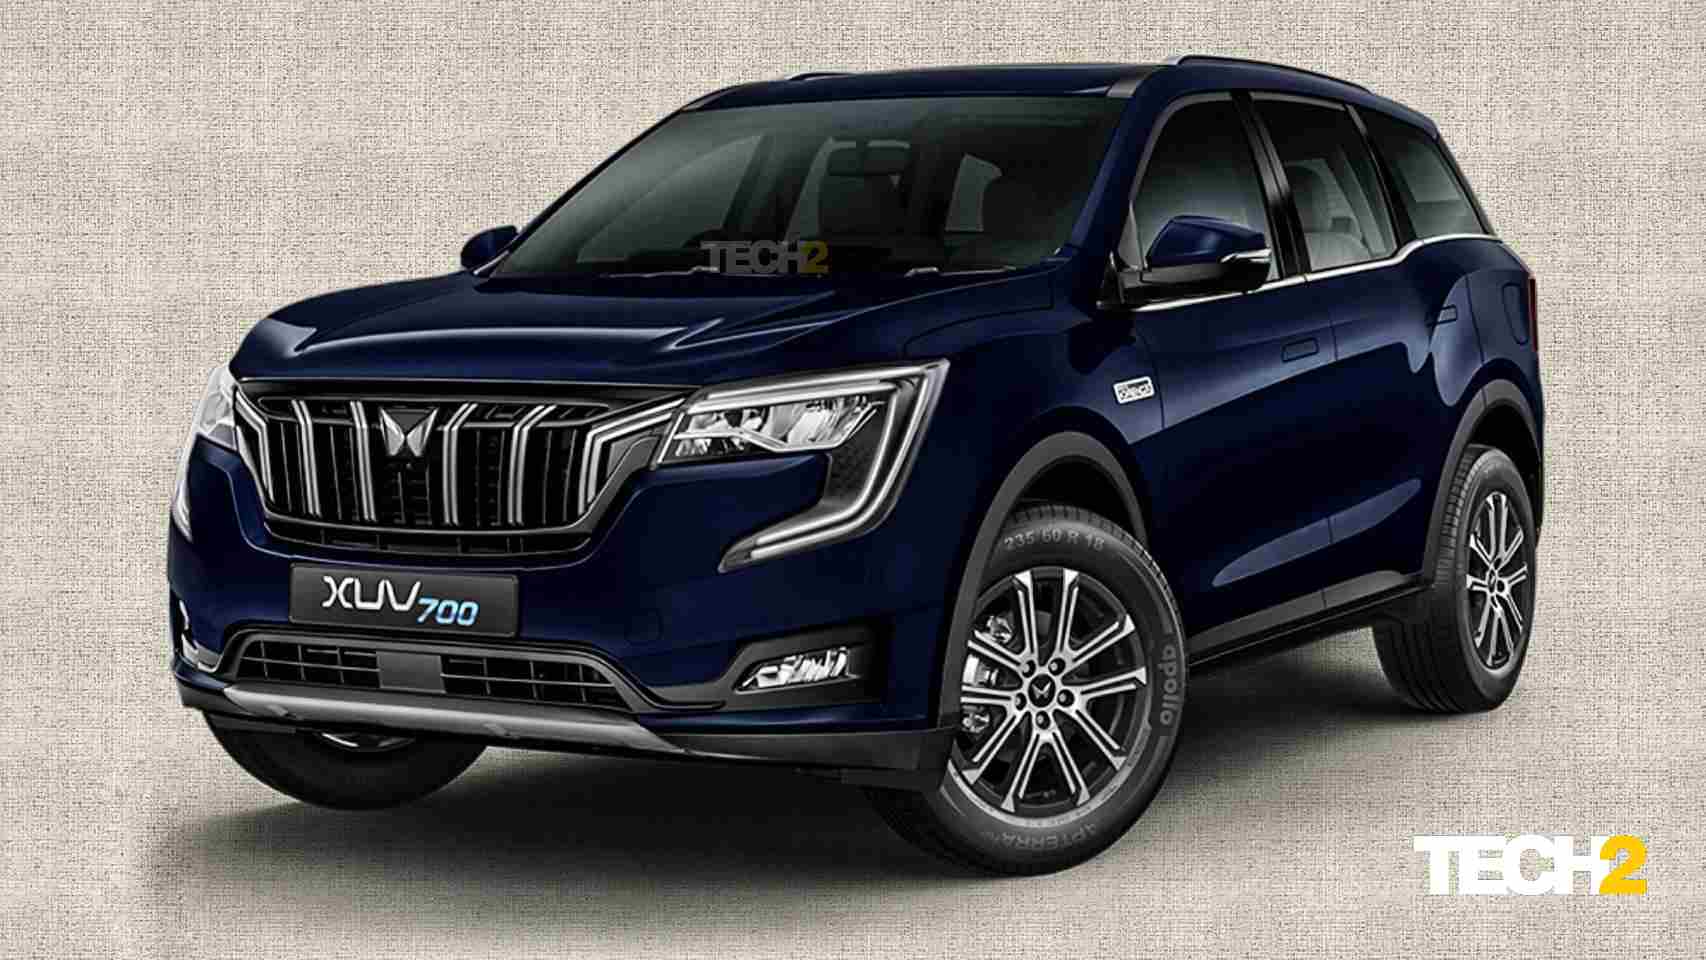 mahindra-xuv700-in-pictures-take-a-look-at-its-design-features-interior-engines-variants